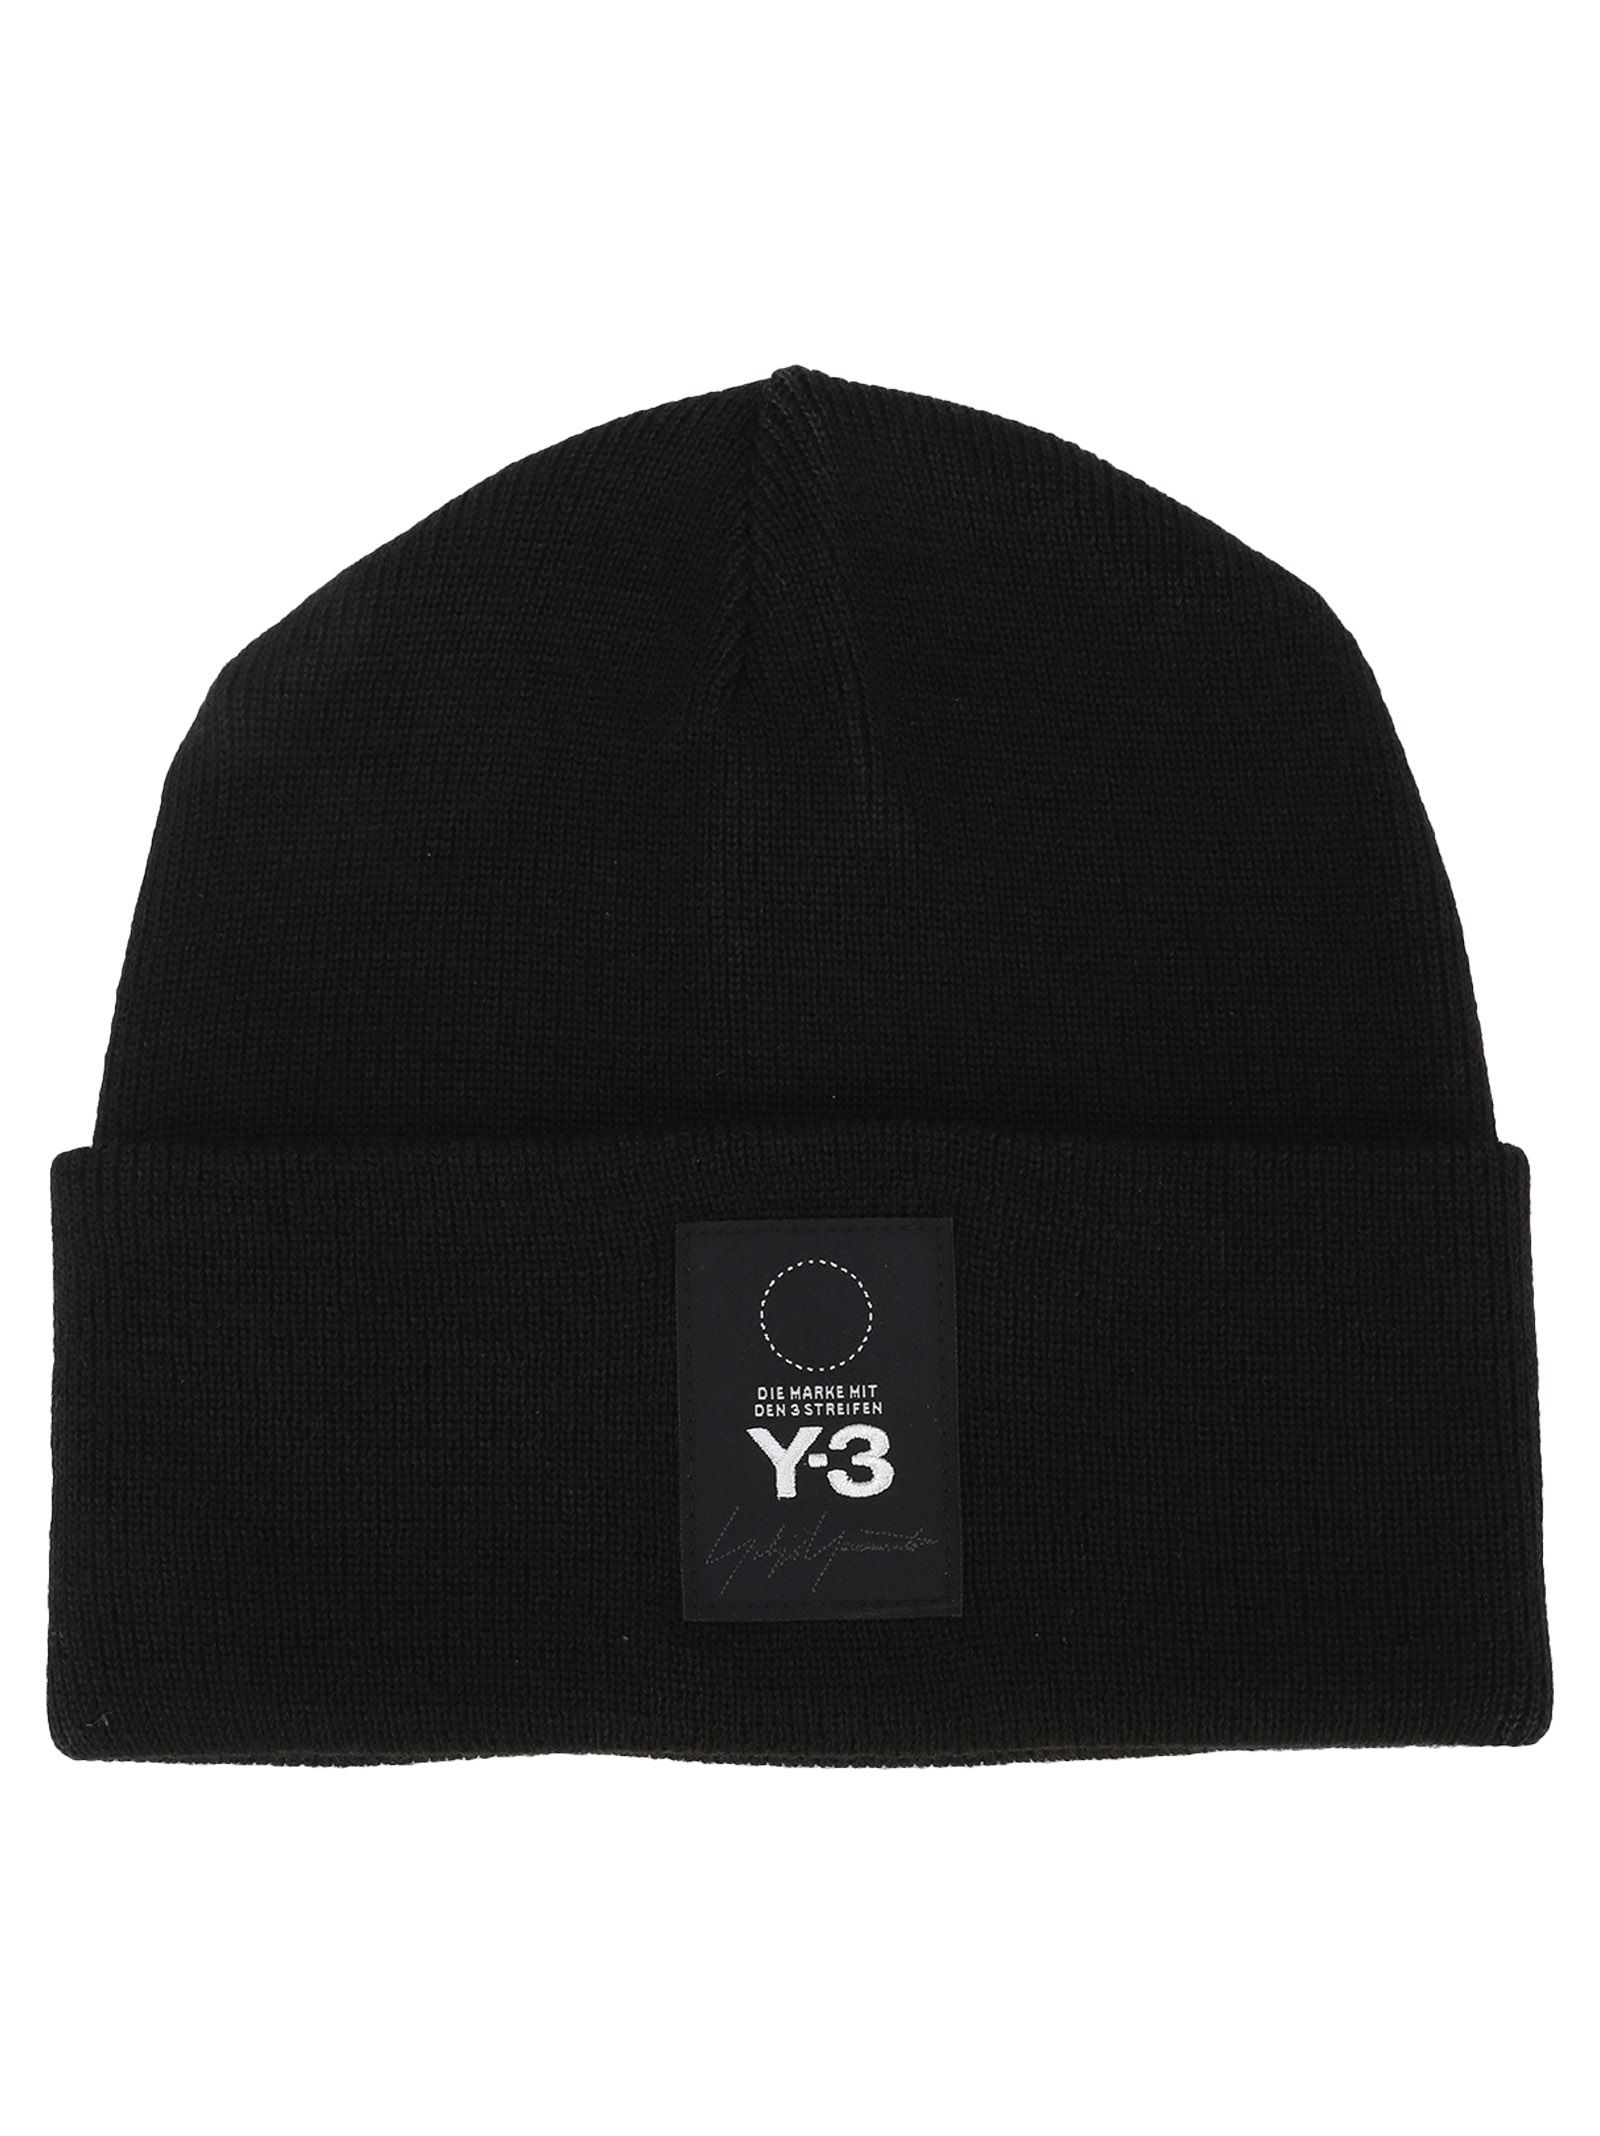 italist | Best price in the market for Y-3 Adidas Y3 Beanie - BLACK ...